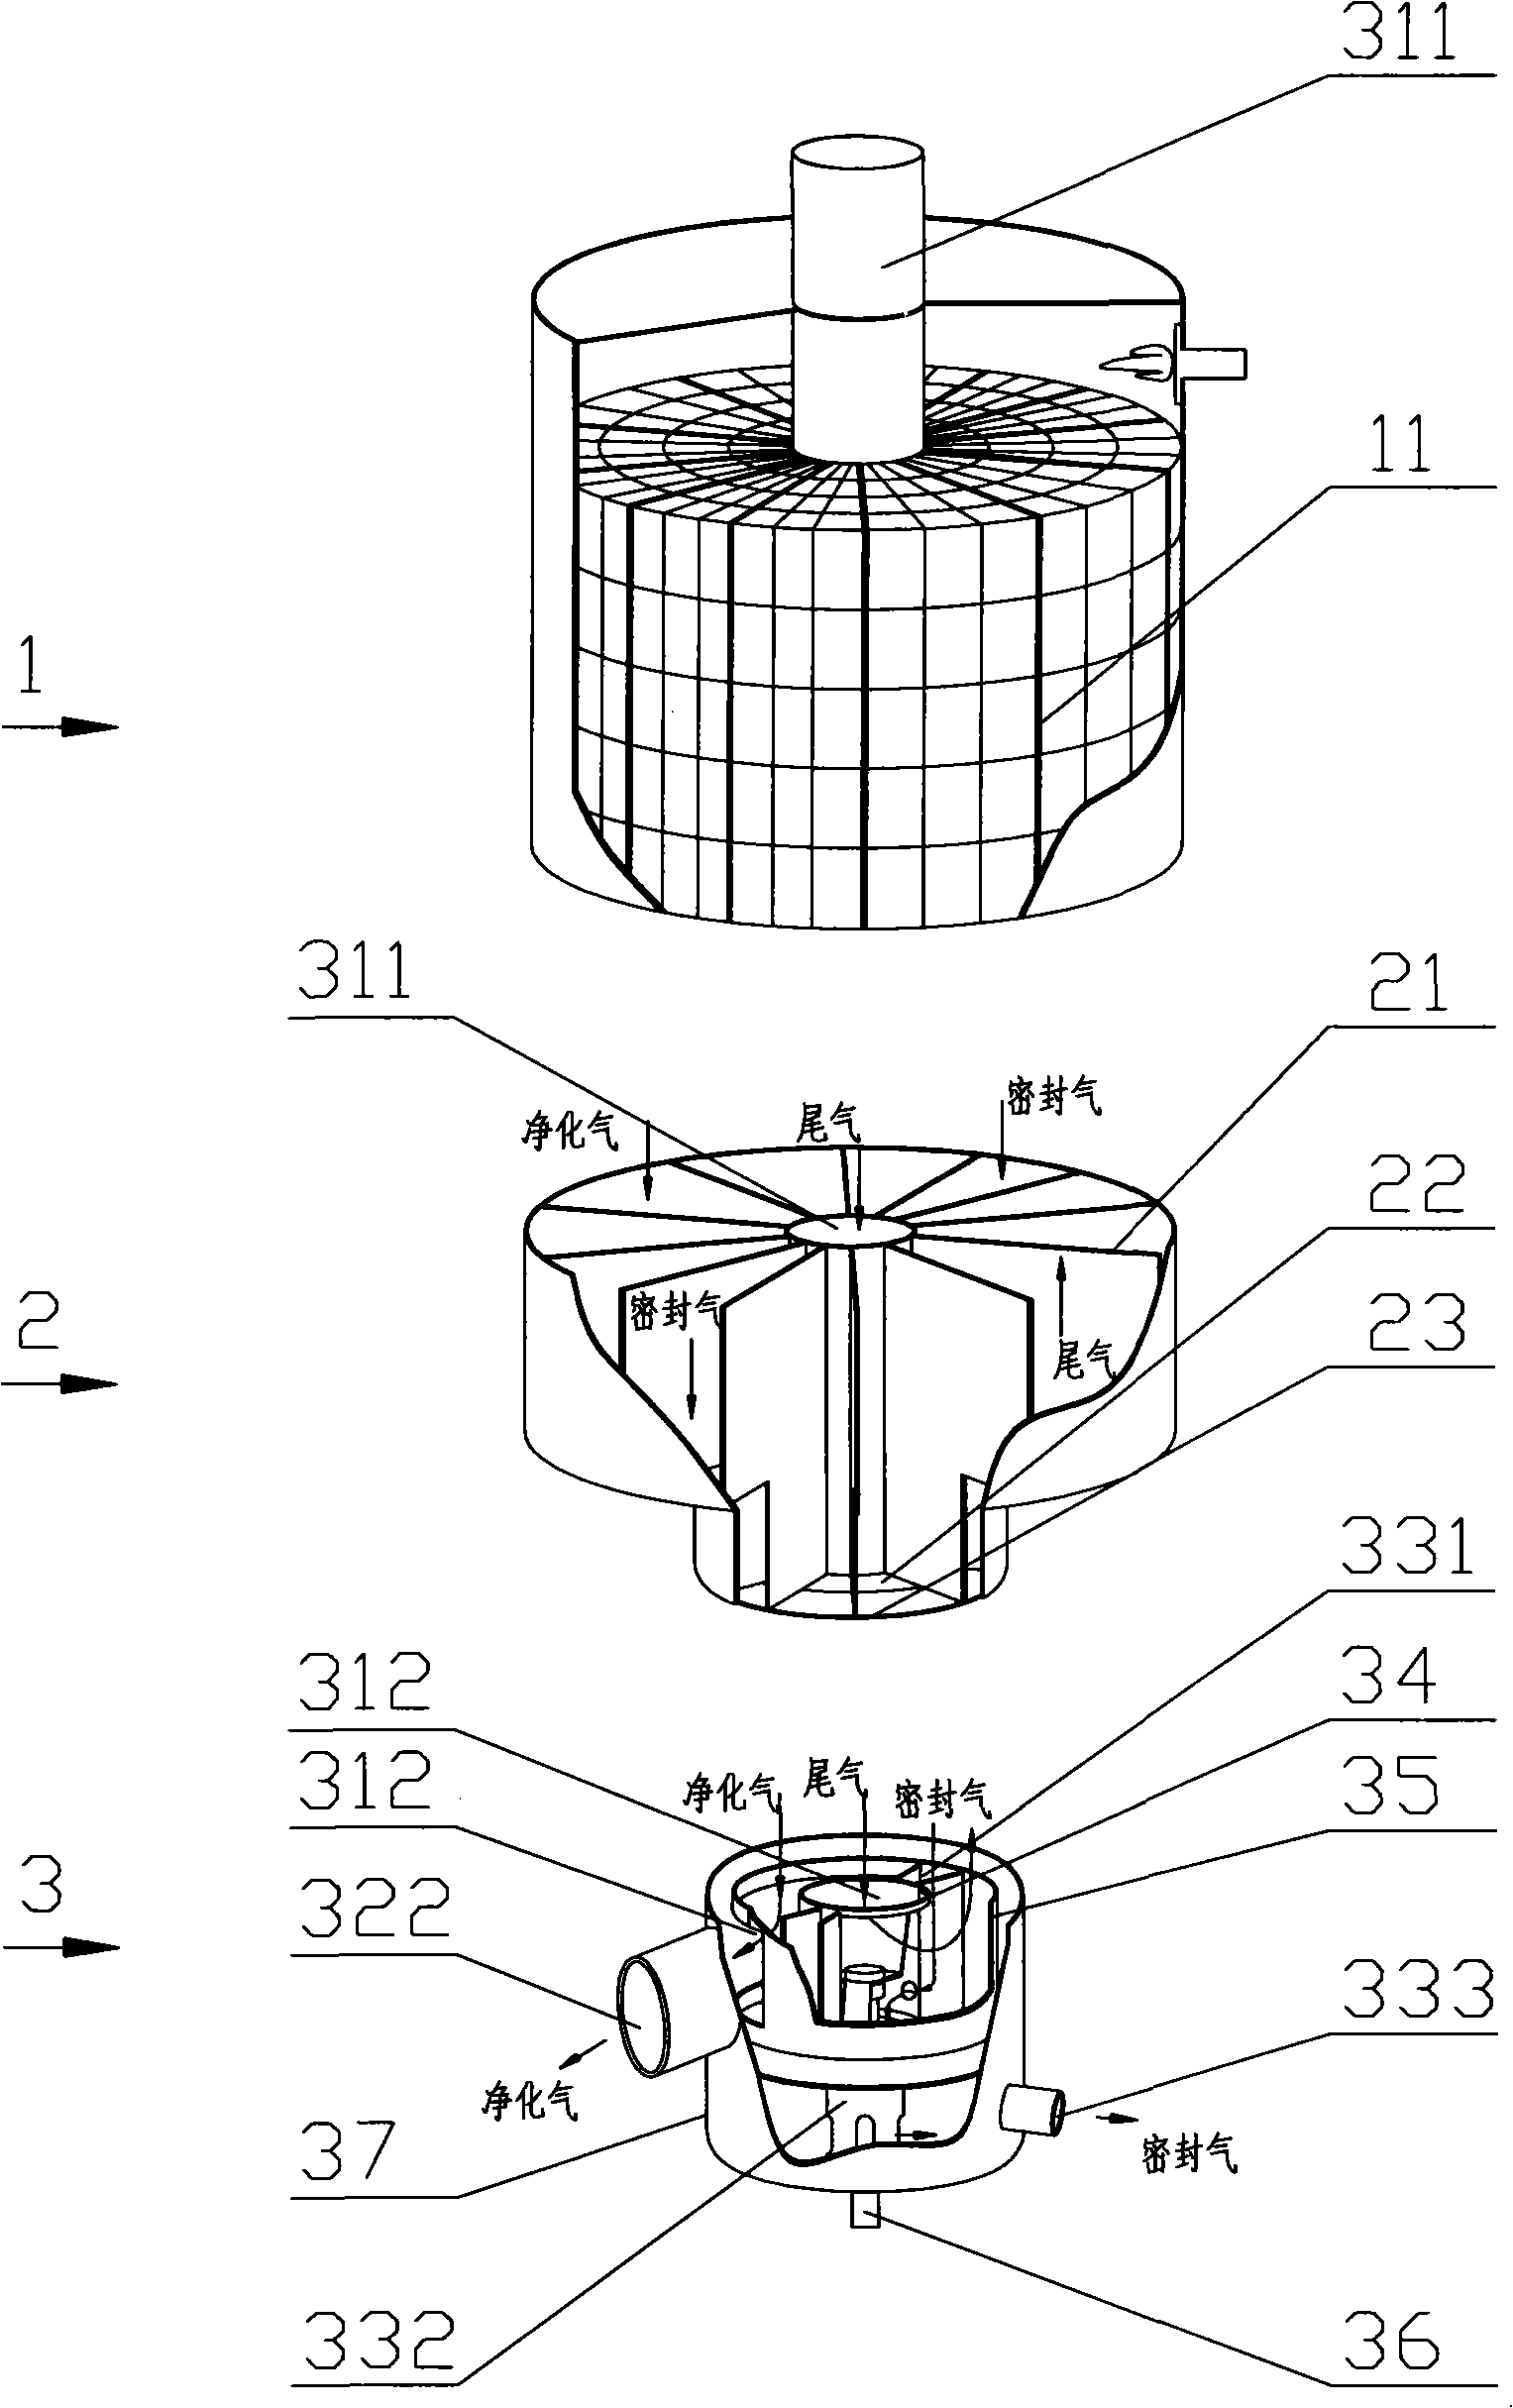 Heat accumulation type thermal oxidation reactor and purification process technique for low concentration organic waste gas